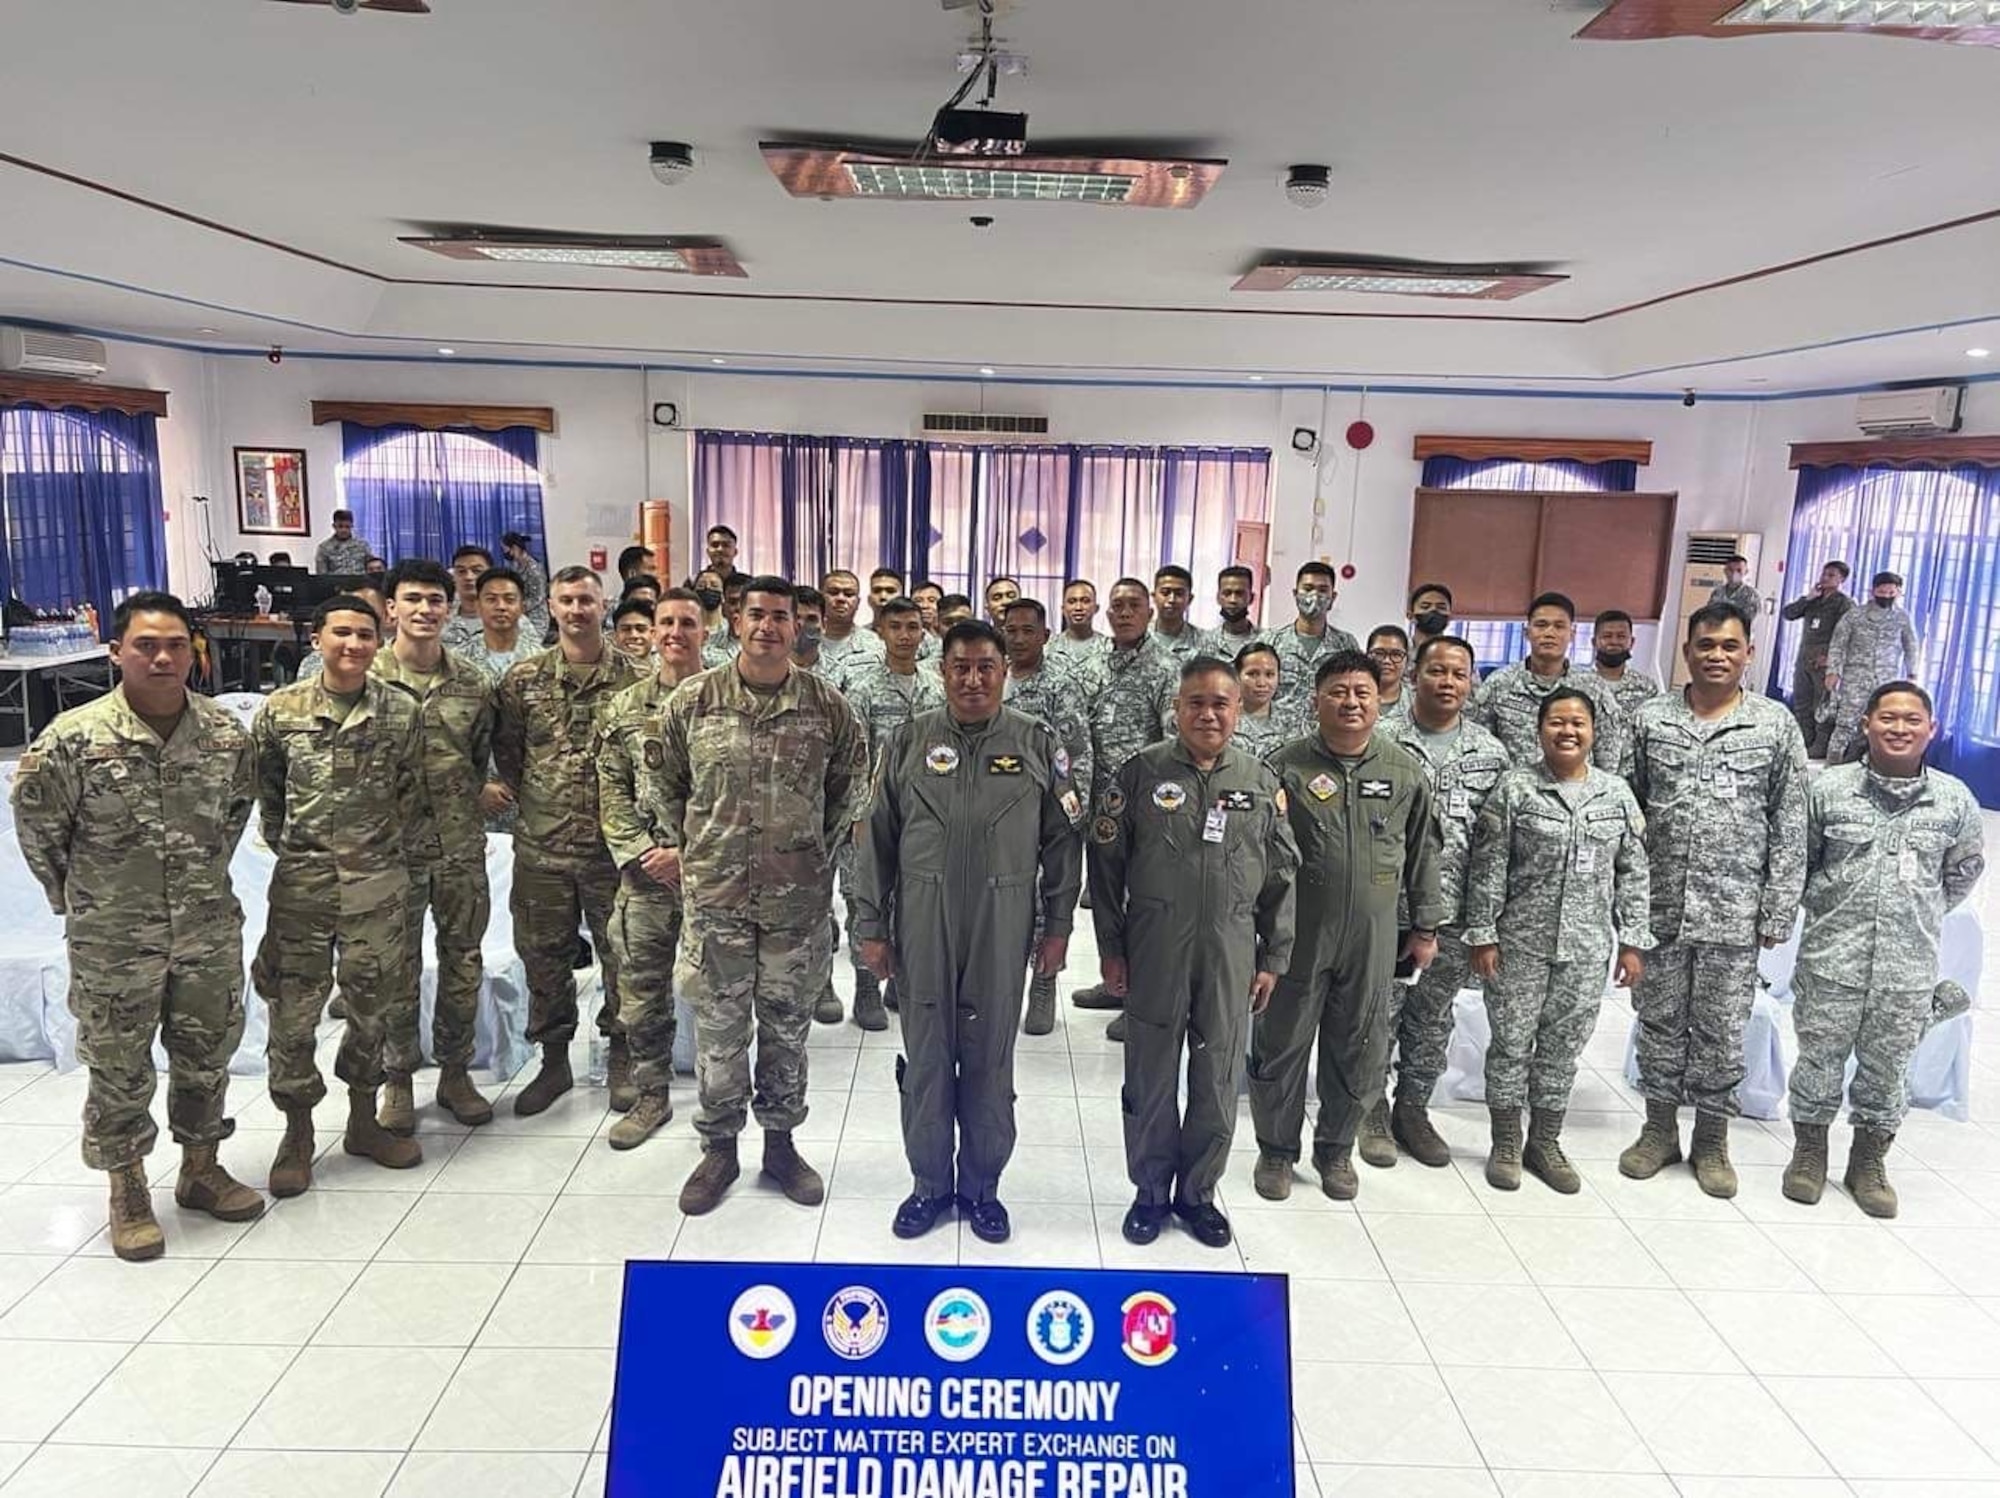 Philippine air force Brig. Gen. Rey Bes and members of both the Philippine and U.S. Air Force attend the opening ceremony of a subject matter expert exchange in the Philippines, Apr. 11, 2023. Bes arrived at the exchange and expressed his excitement for the event and looked forward to continued collaboration as a part of Balikatan exercises in the future. (Courtesy photo from Philippine air force public affairs)